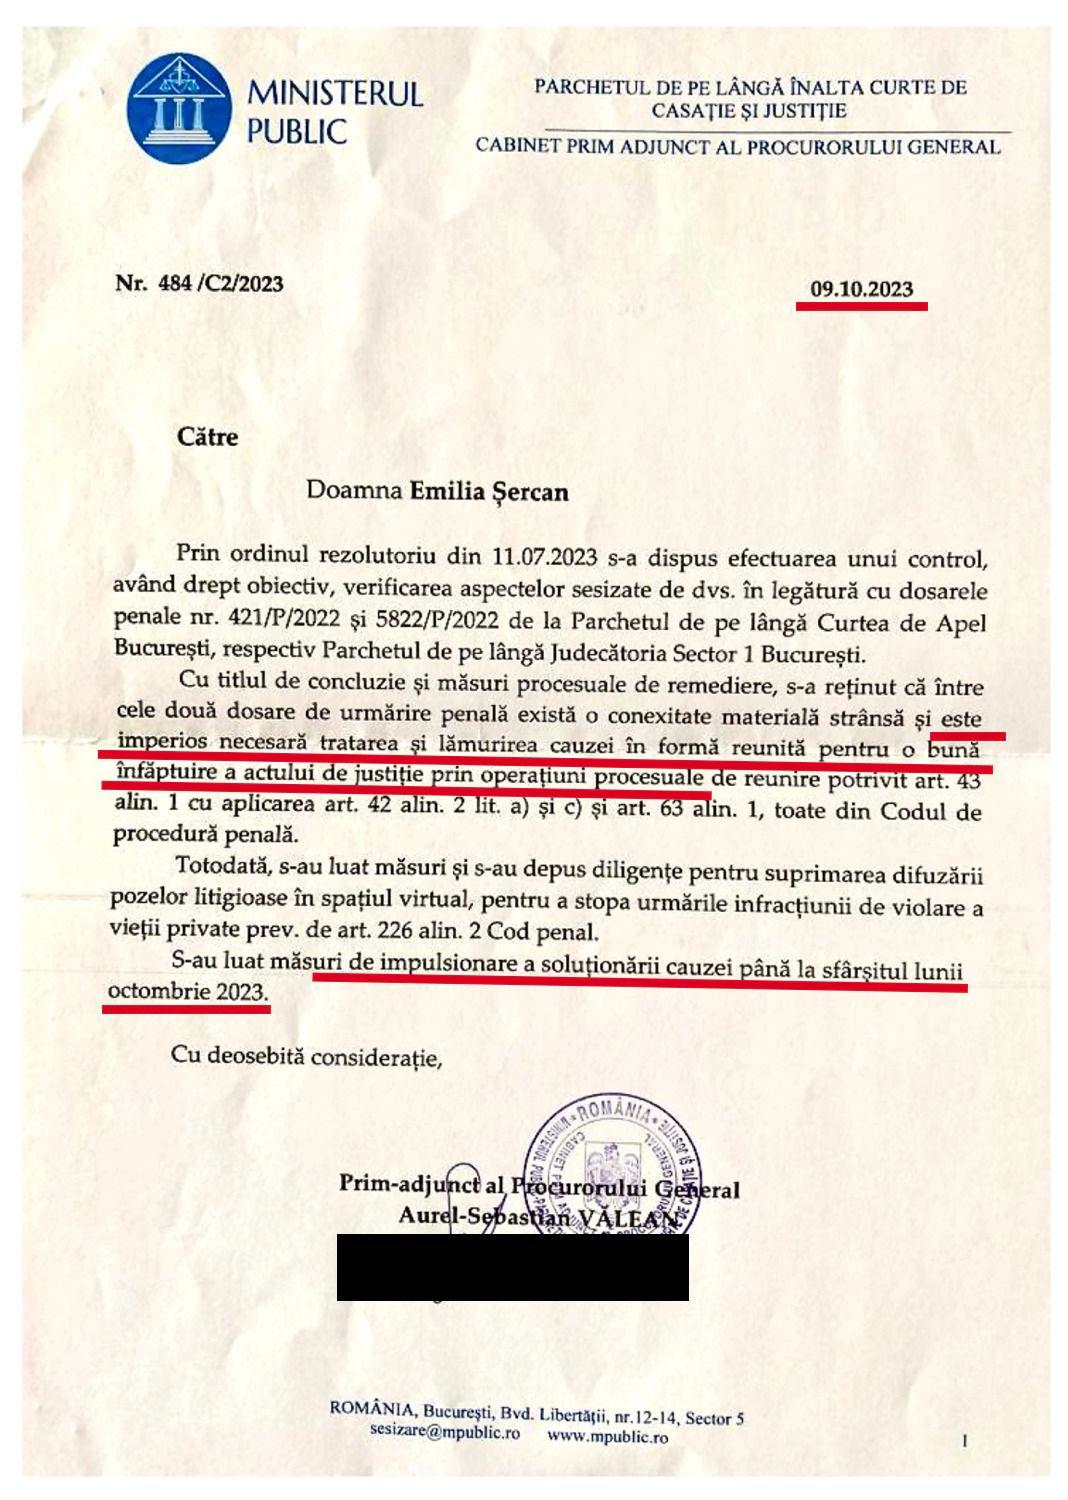 The October 9th document in which the First Deputy Prosecutor General informed me that he had asked Prosecutor Nicoleta Rotaru of the PCAB to solve the case "by the end of October 2023"